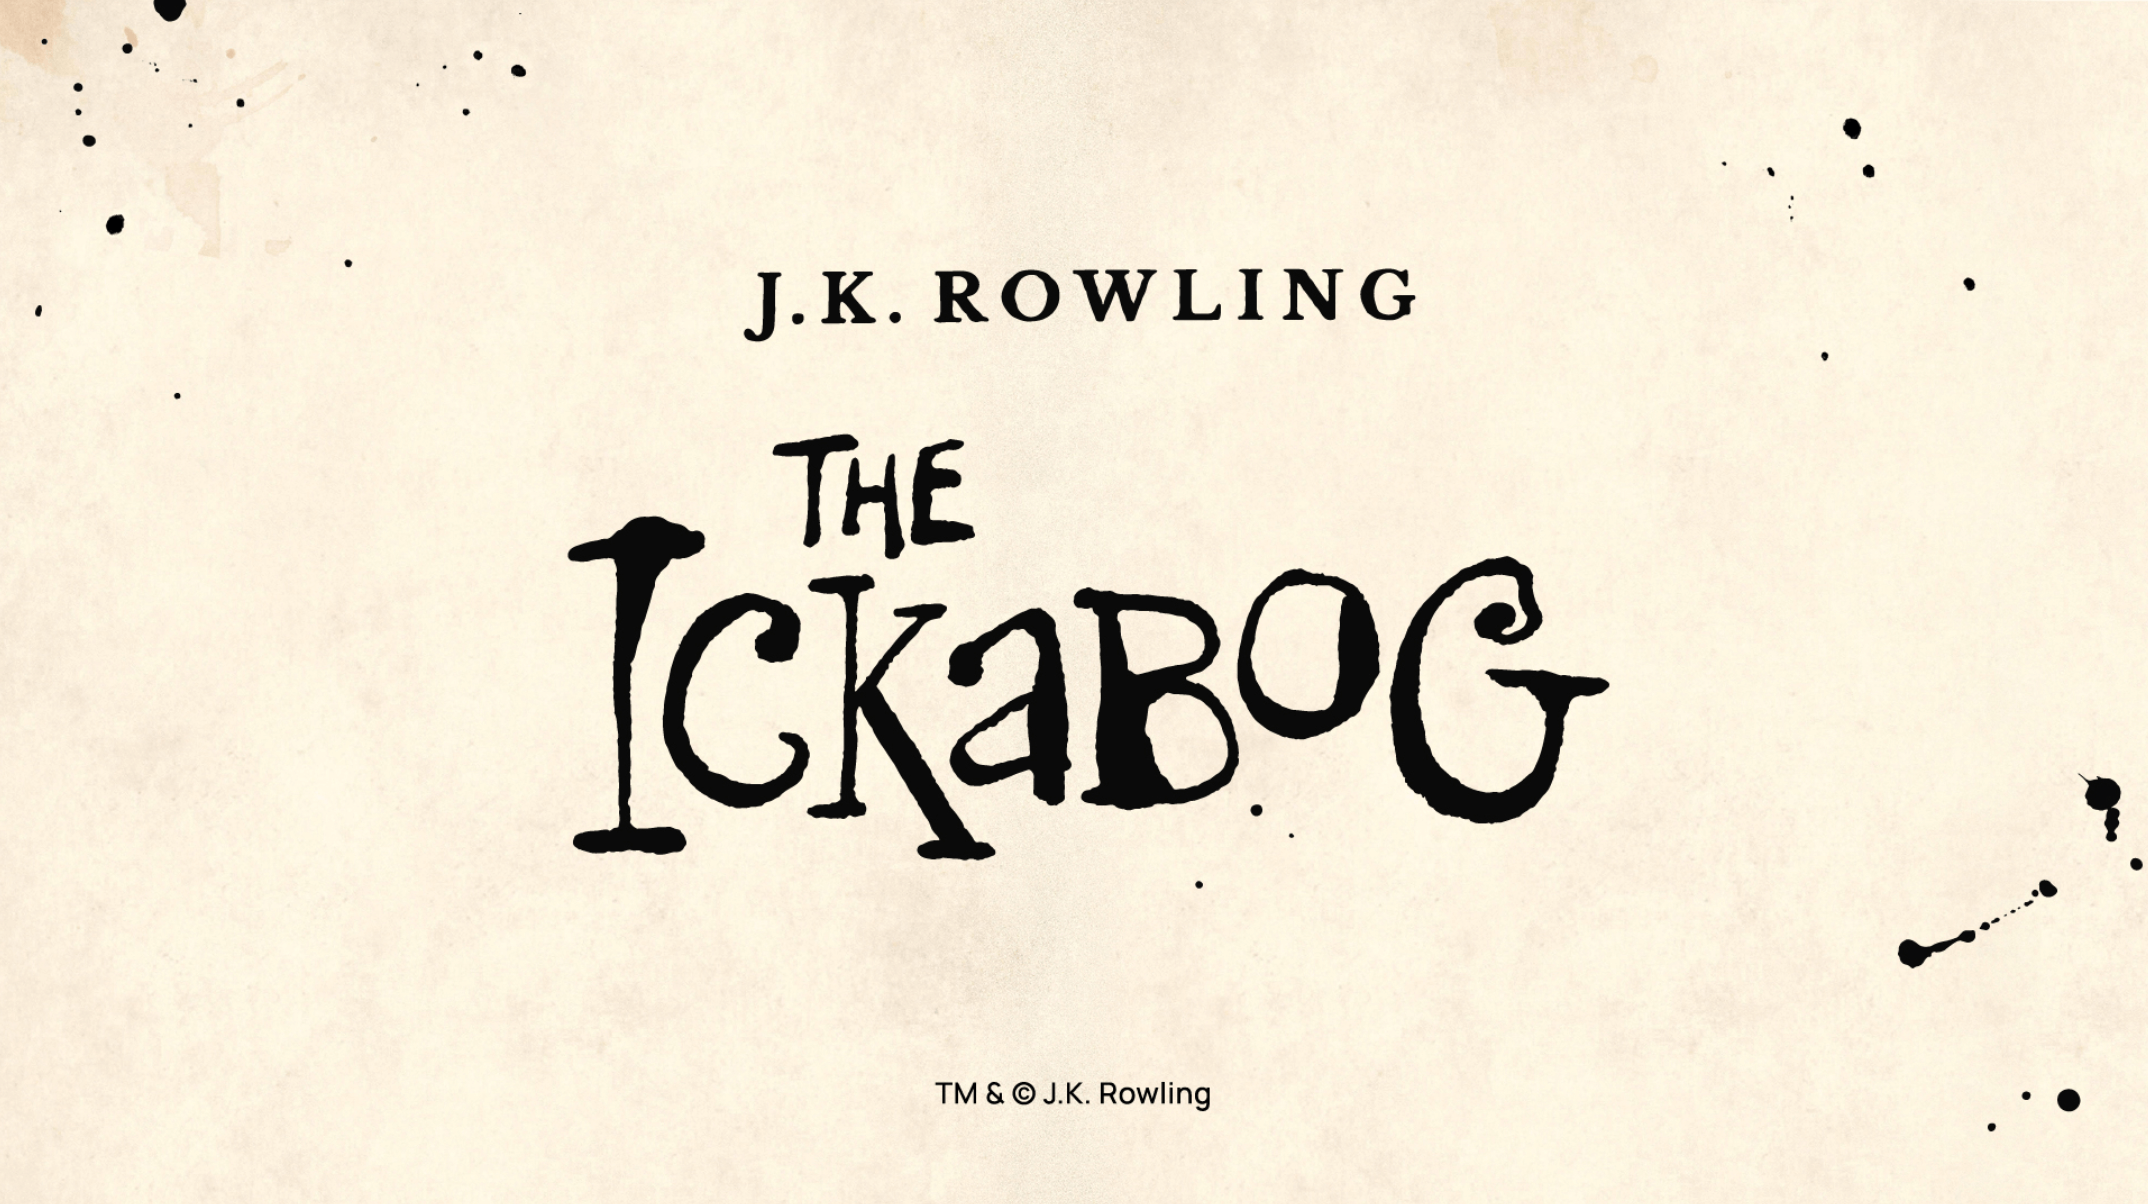 Read the Latest Chapters of the Ickabog Online